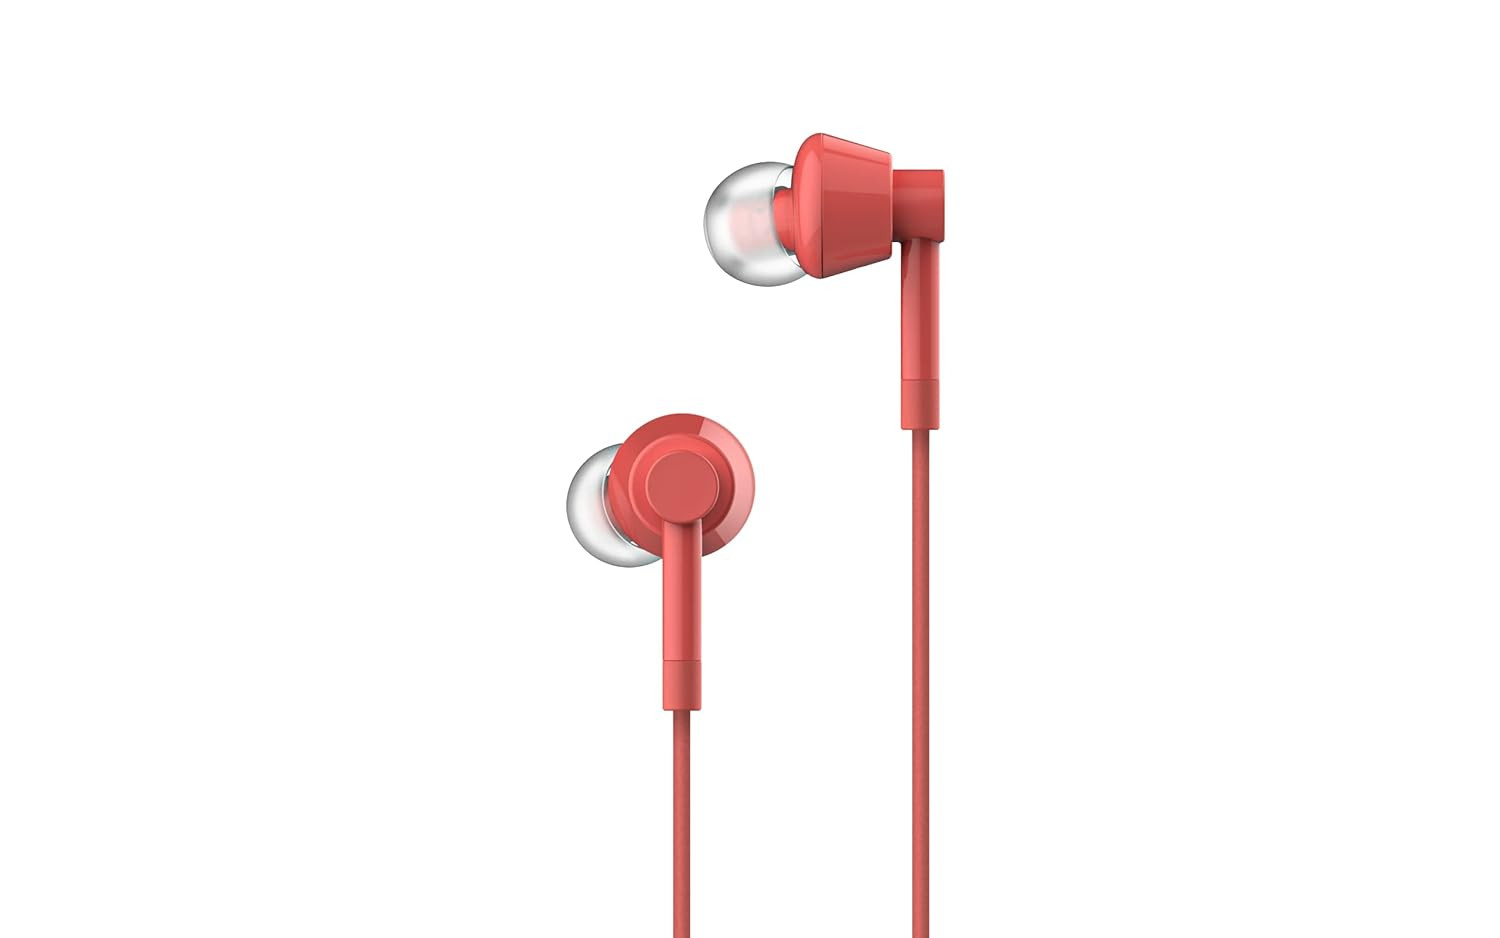 Nokia Buds (Wb-101) Powerful Bass Performance Wired In Ear Earphones With Mic For Clear Voice Calls, Virtual Assistant Control Enabled Angled Acoustic Tubes For A Comfortable And Secure Fit, Red